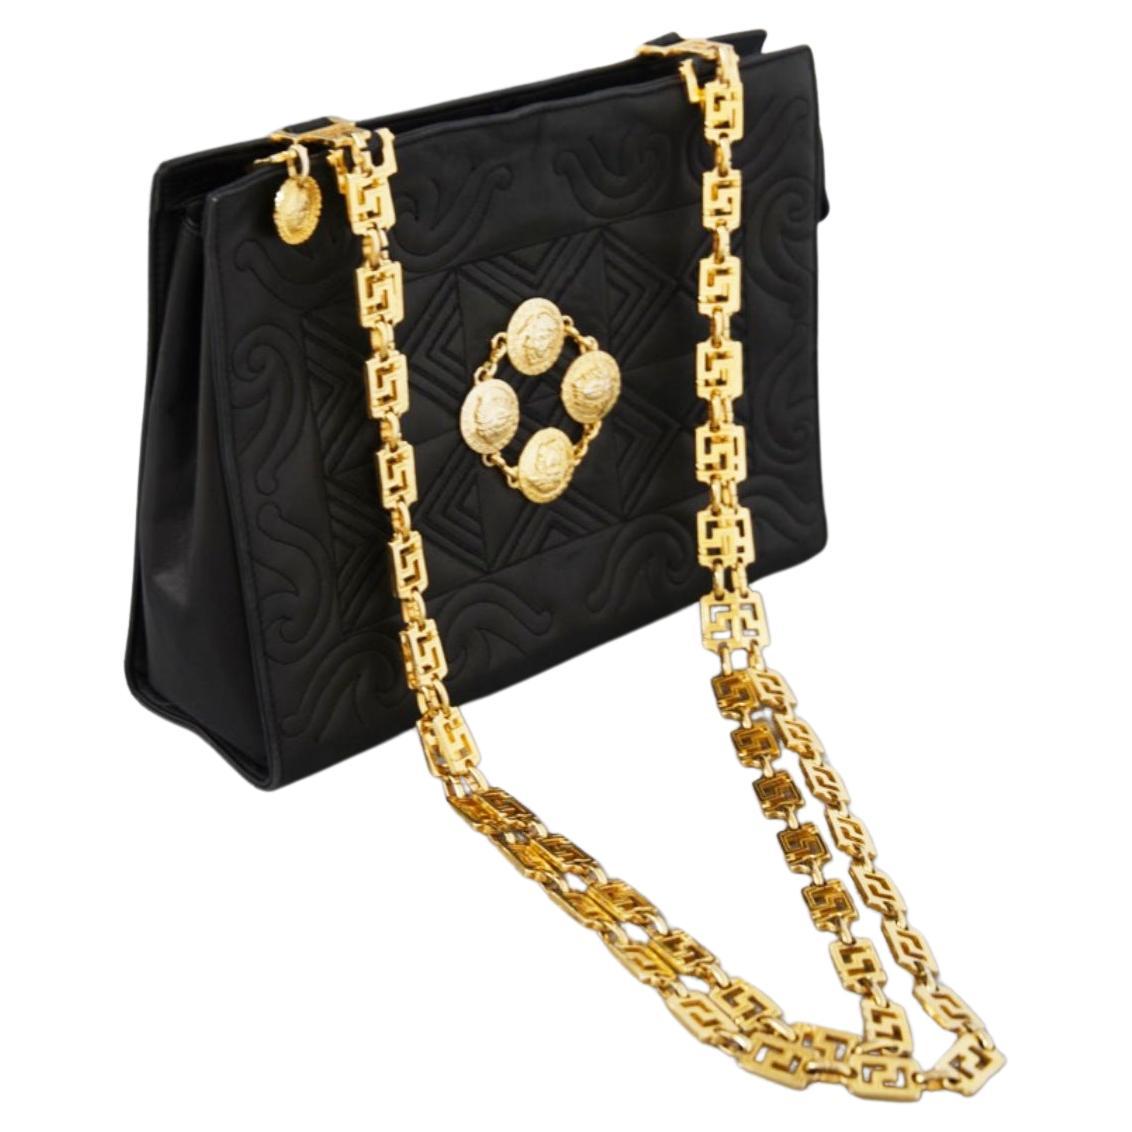 Gianni Versace Couture Shoulder Bags